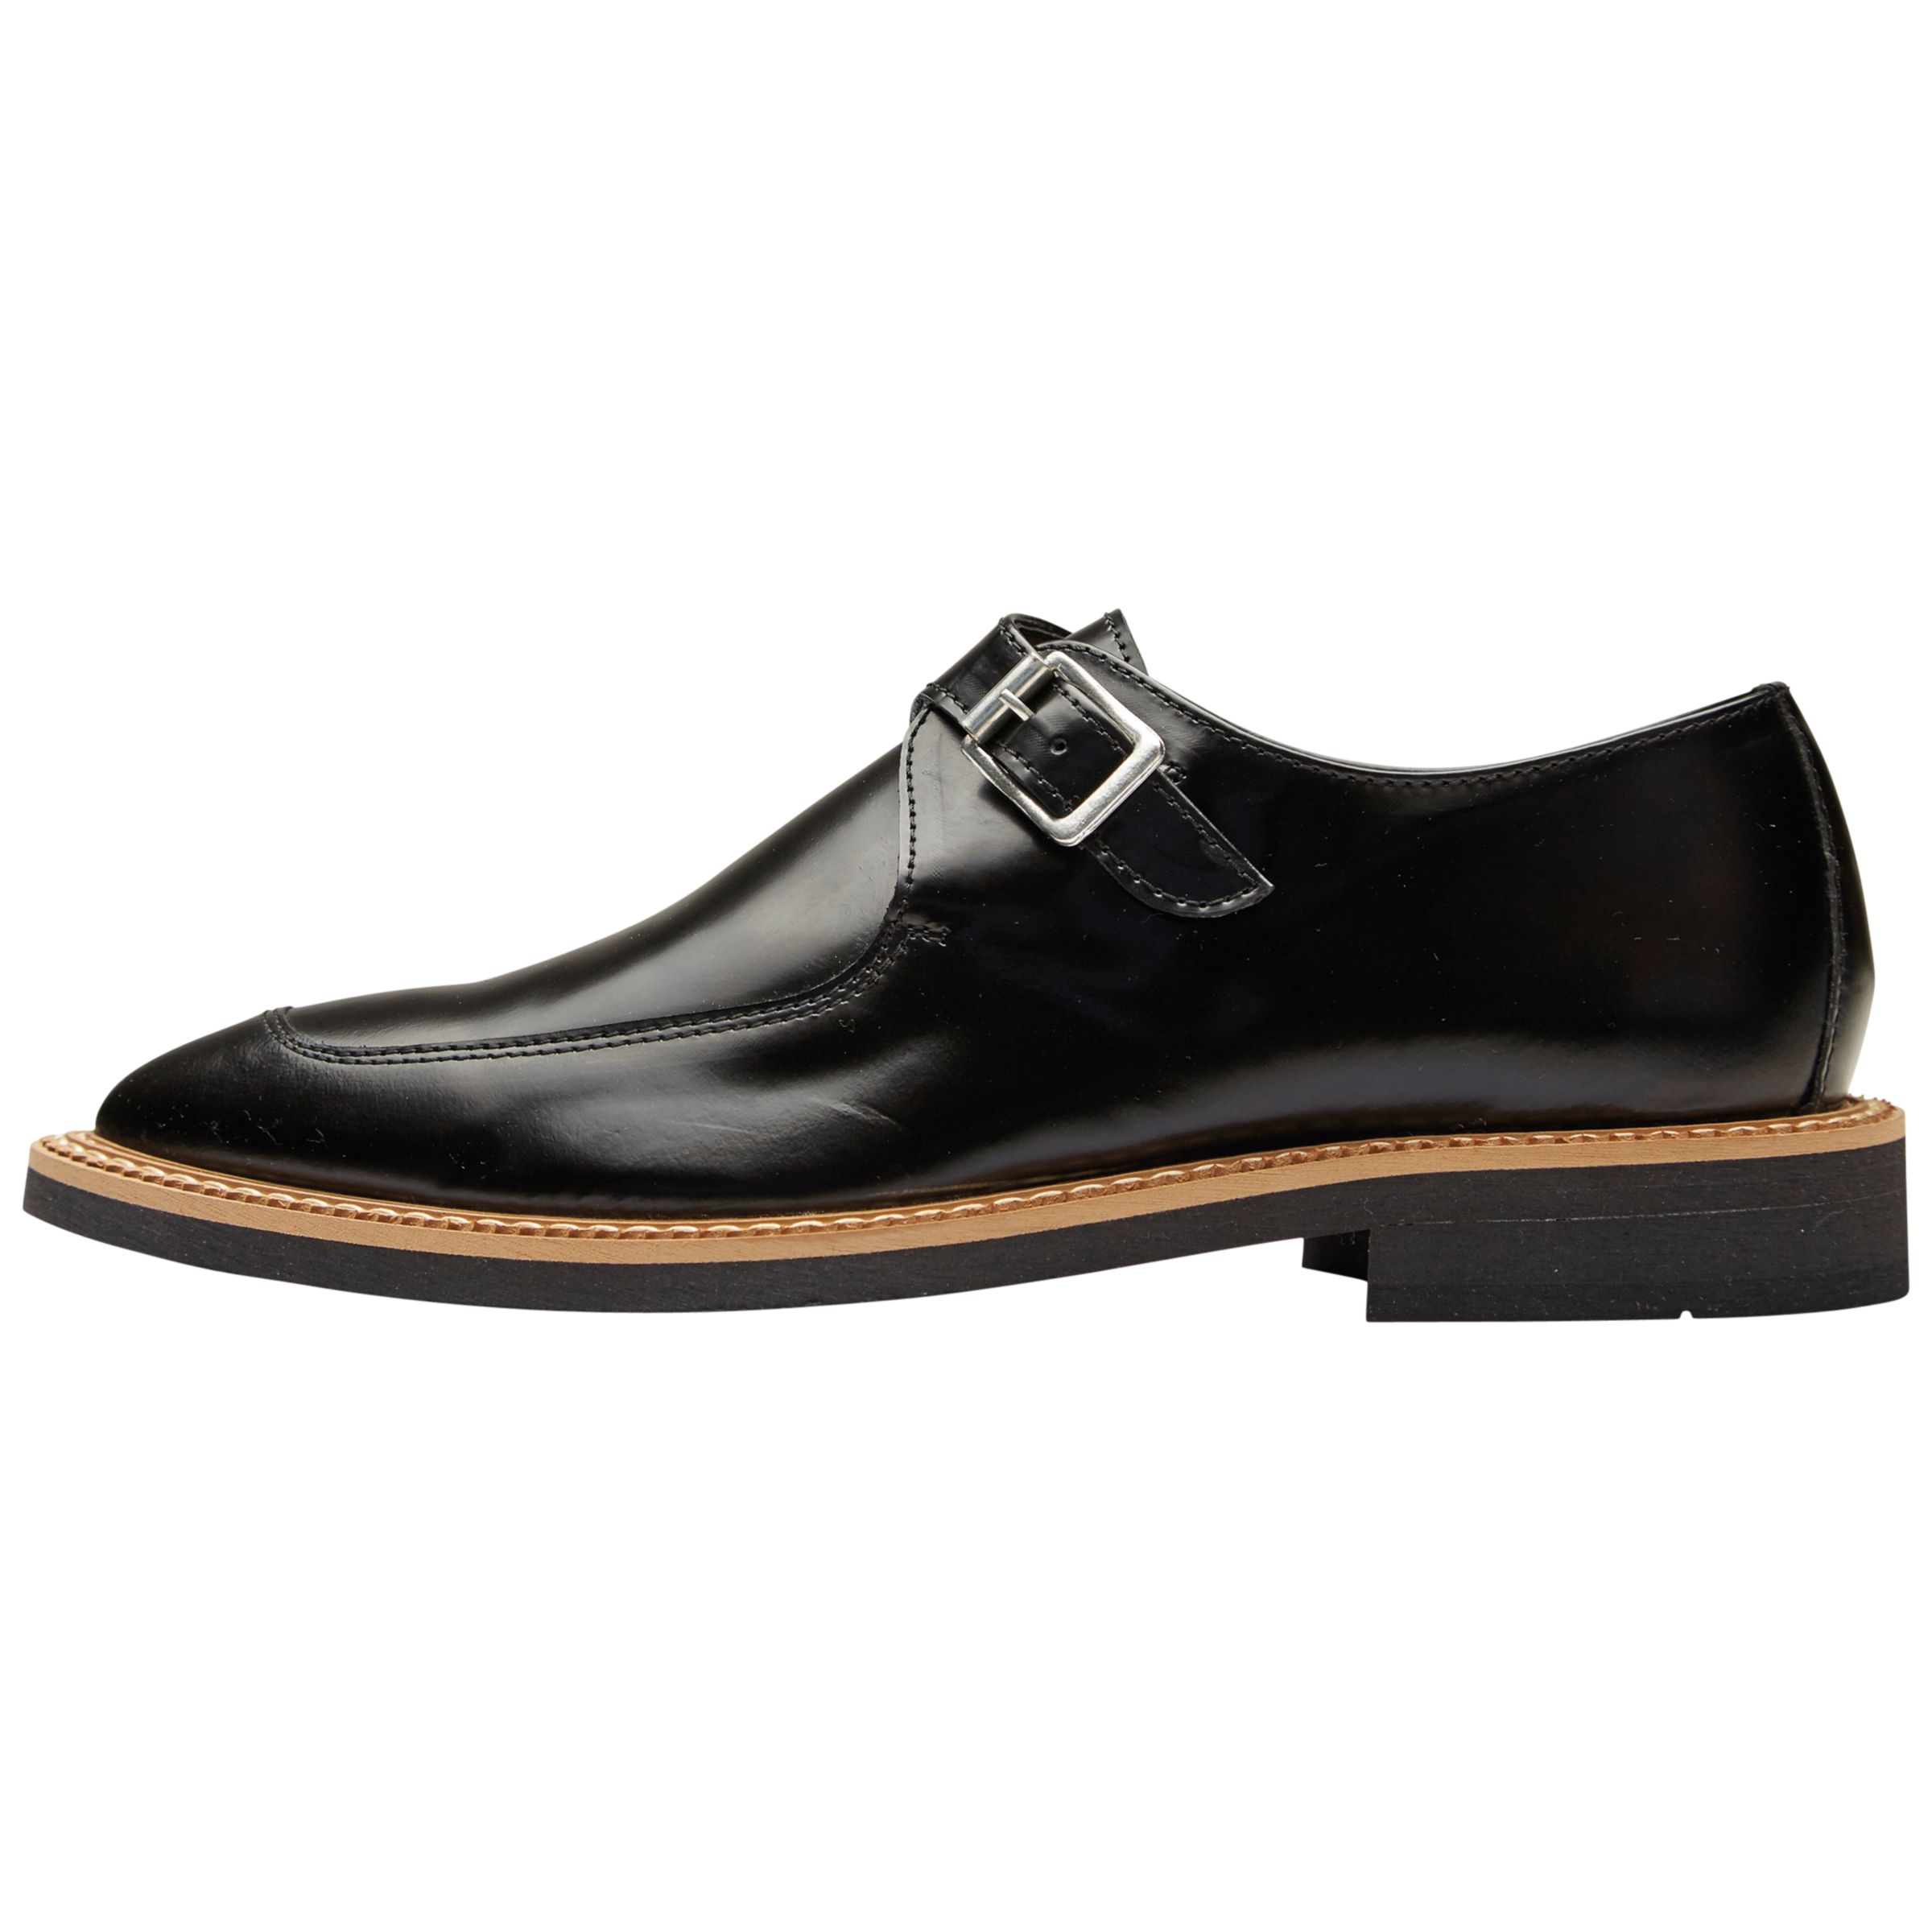 Selected Femme Mira Leather Monk Shoes, Black